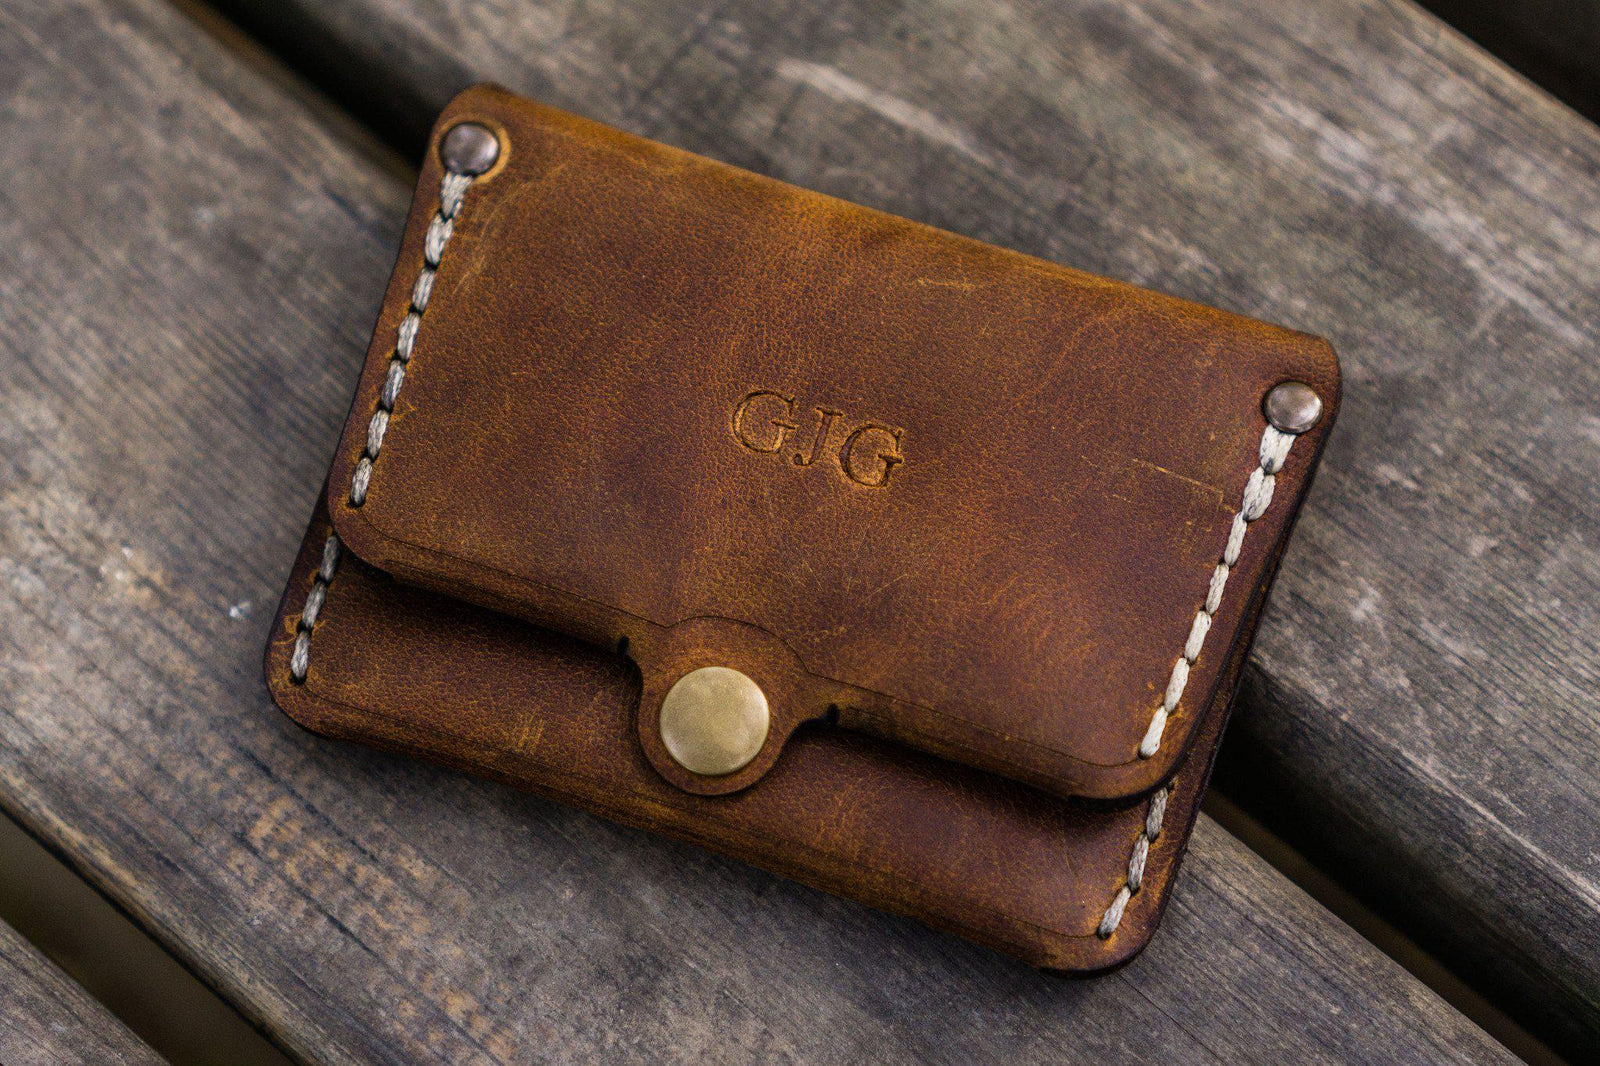 Handmade Leather Wallets and Card Holders - J.H. Leather